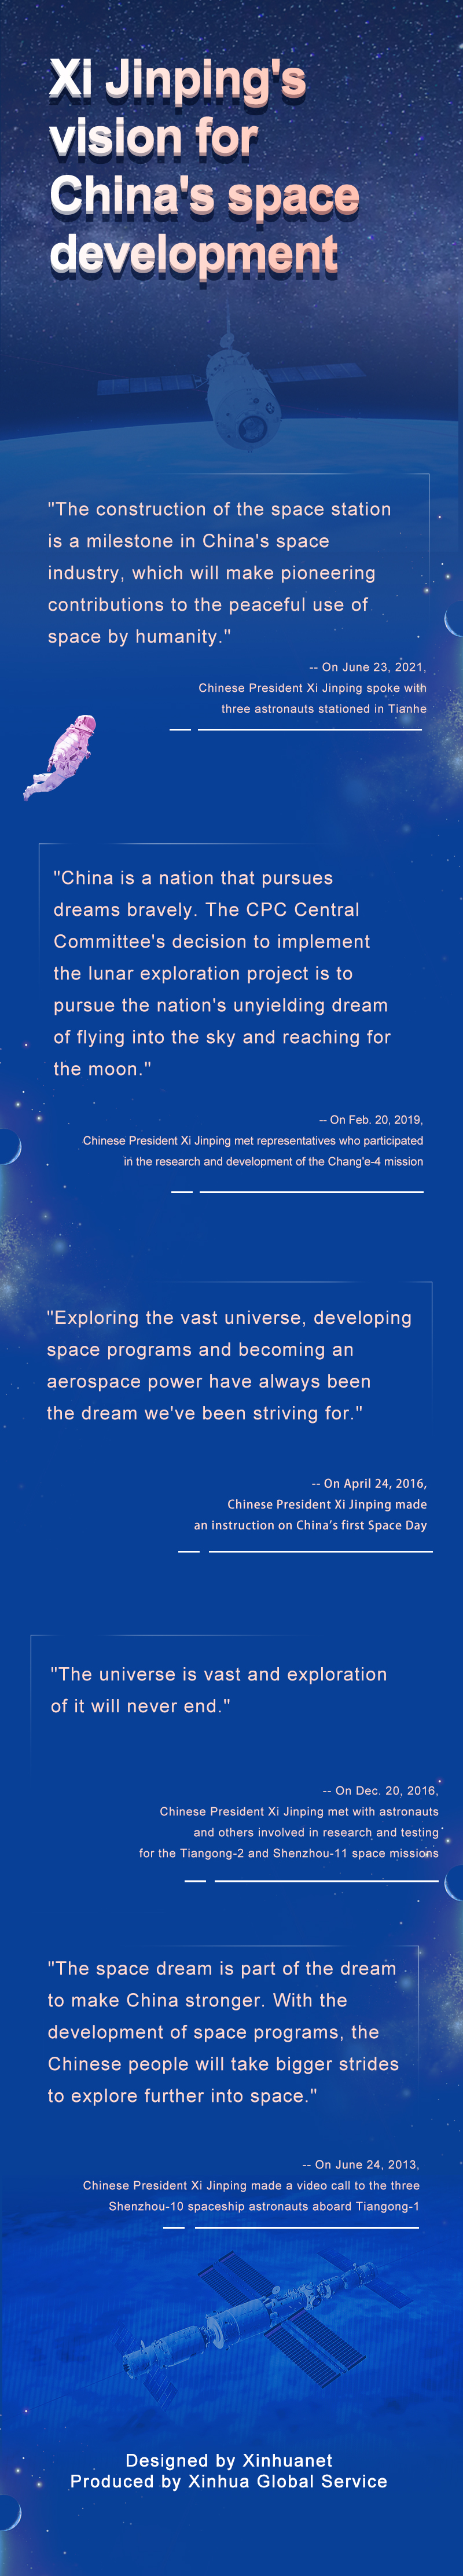 Xi Jinping's vision for China's space development